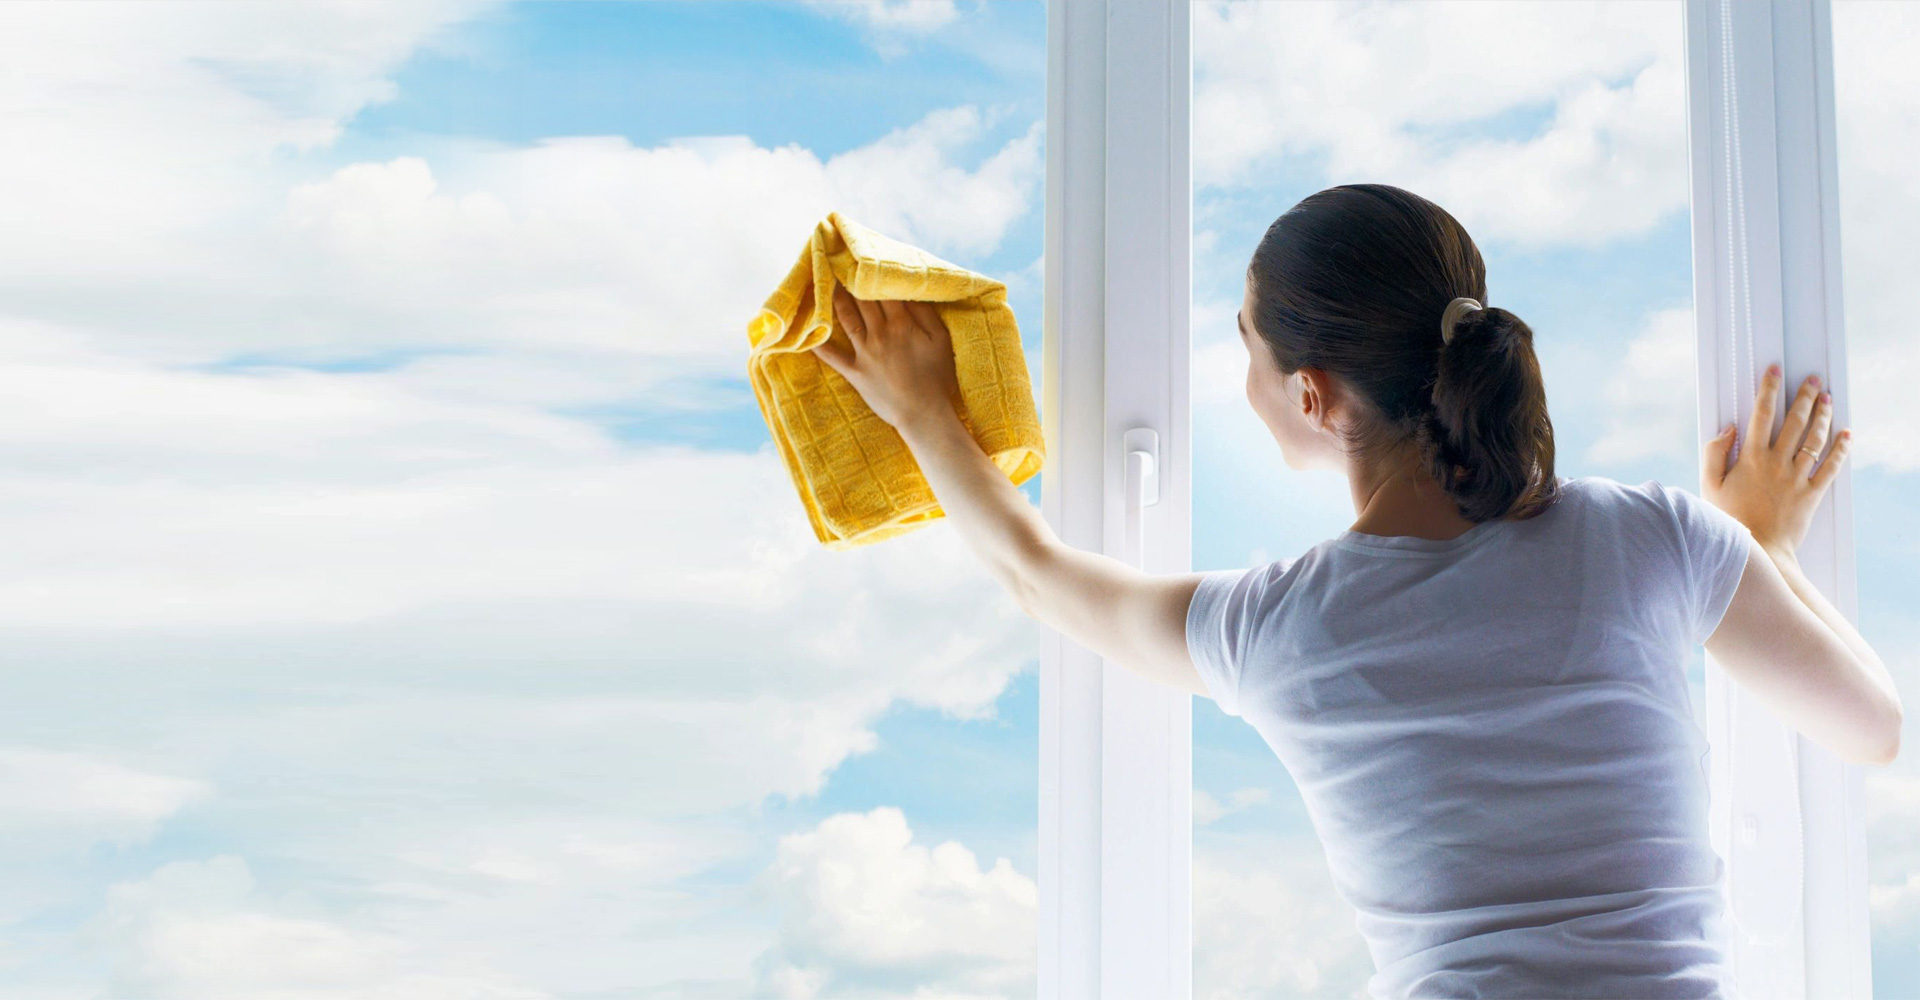 Collier Window Cleaning